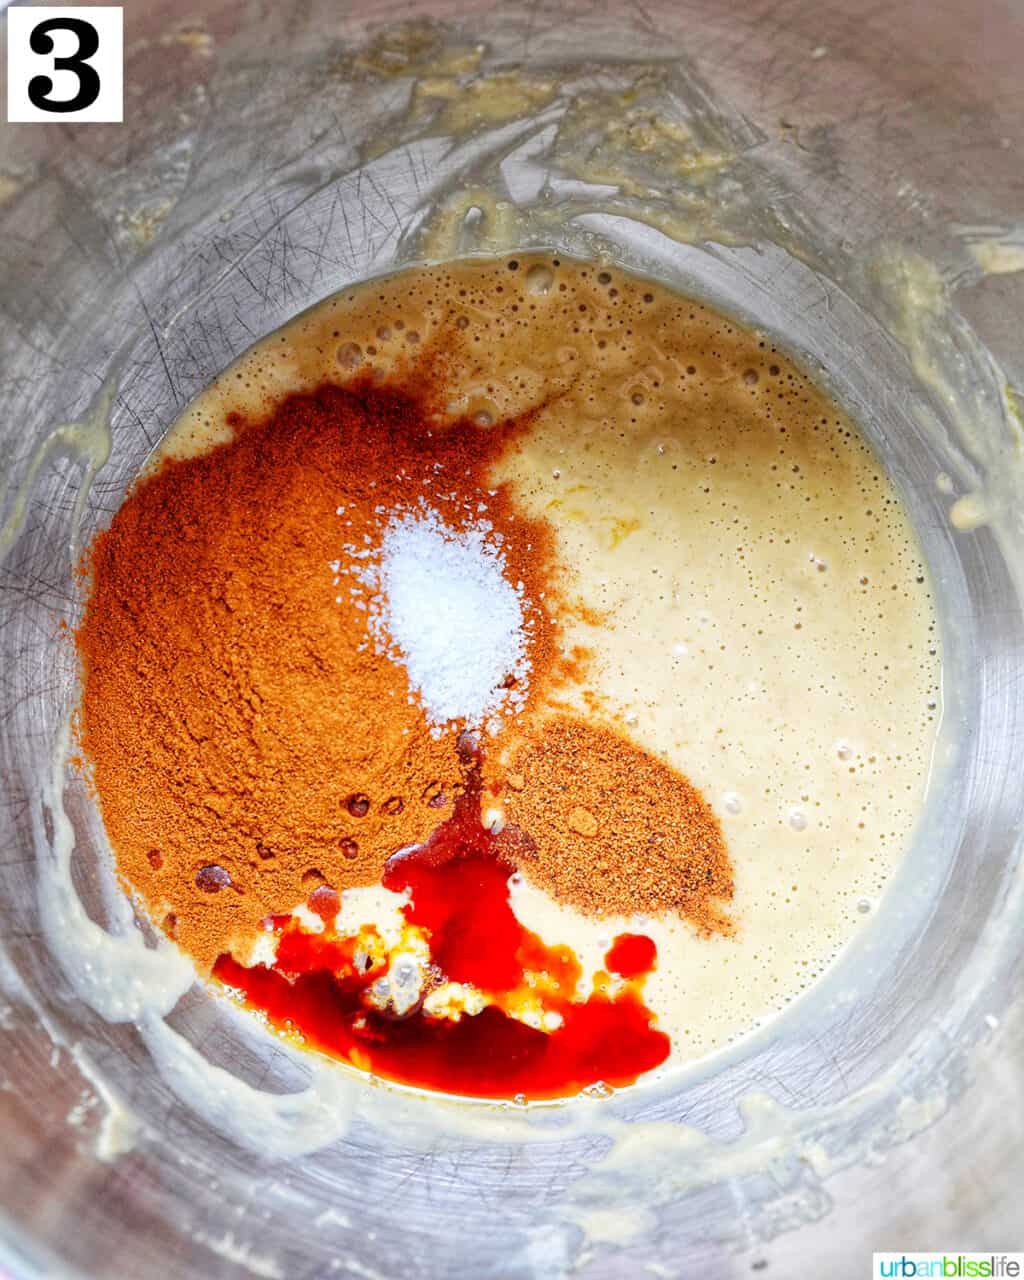 spices added to cinnamon pie batter in a stainless steel bowl.